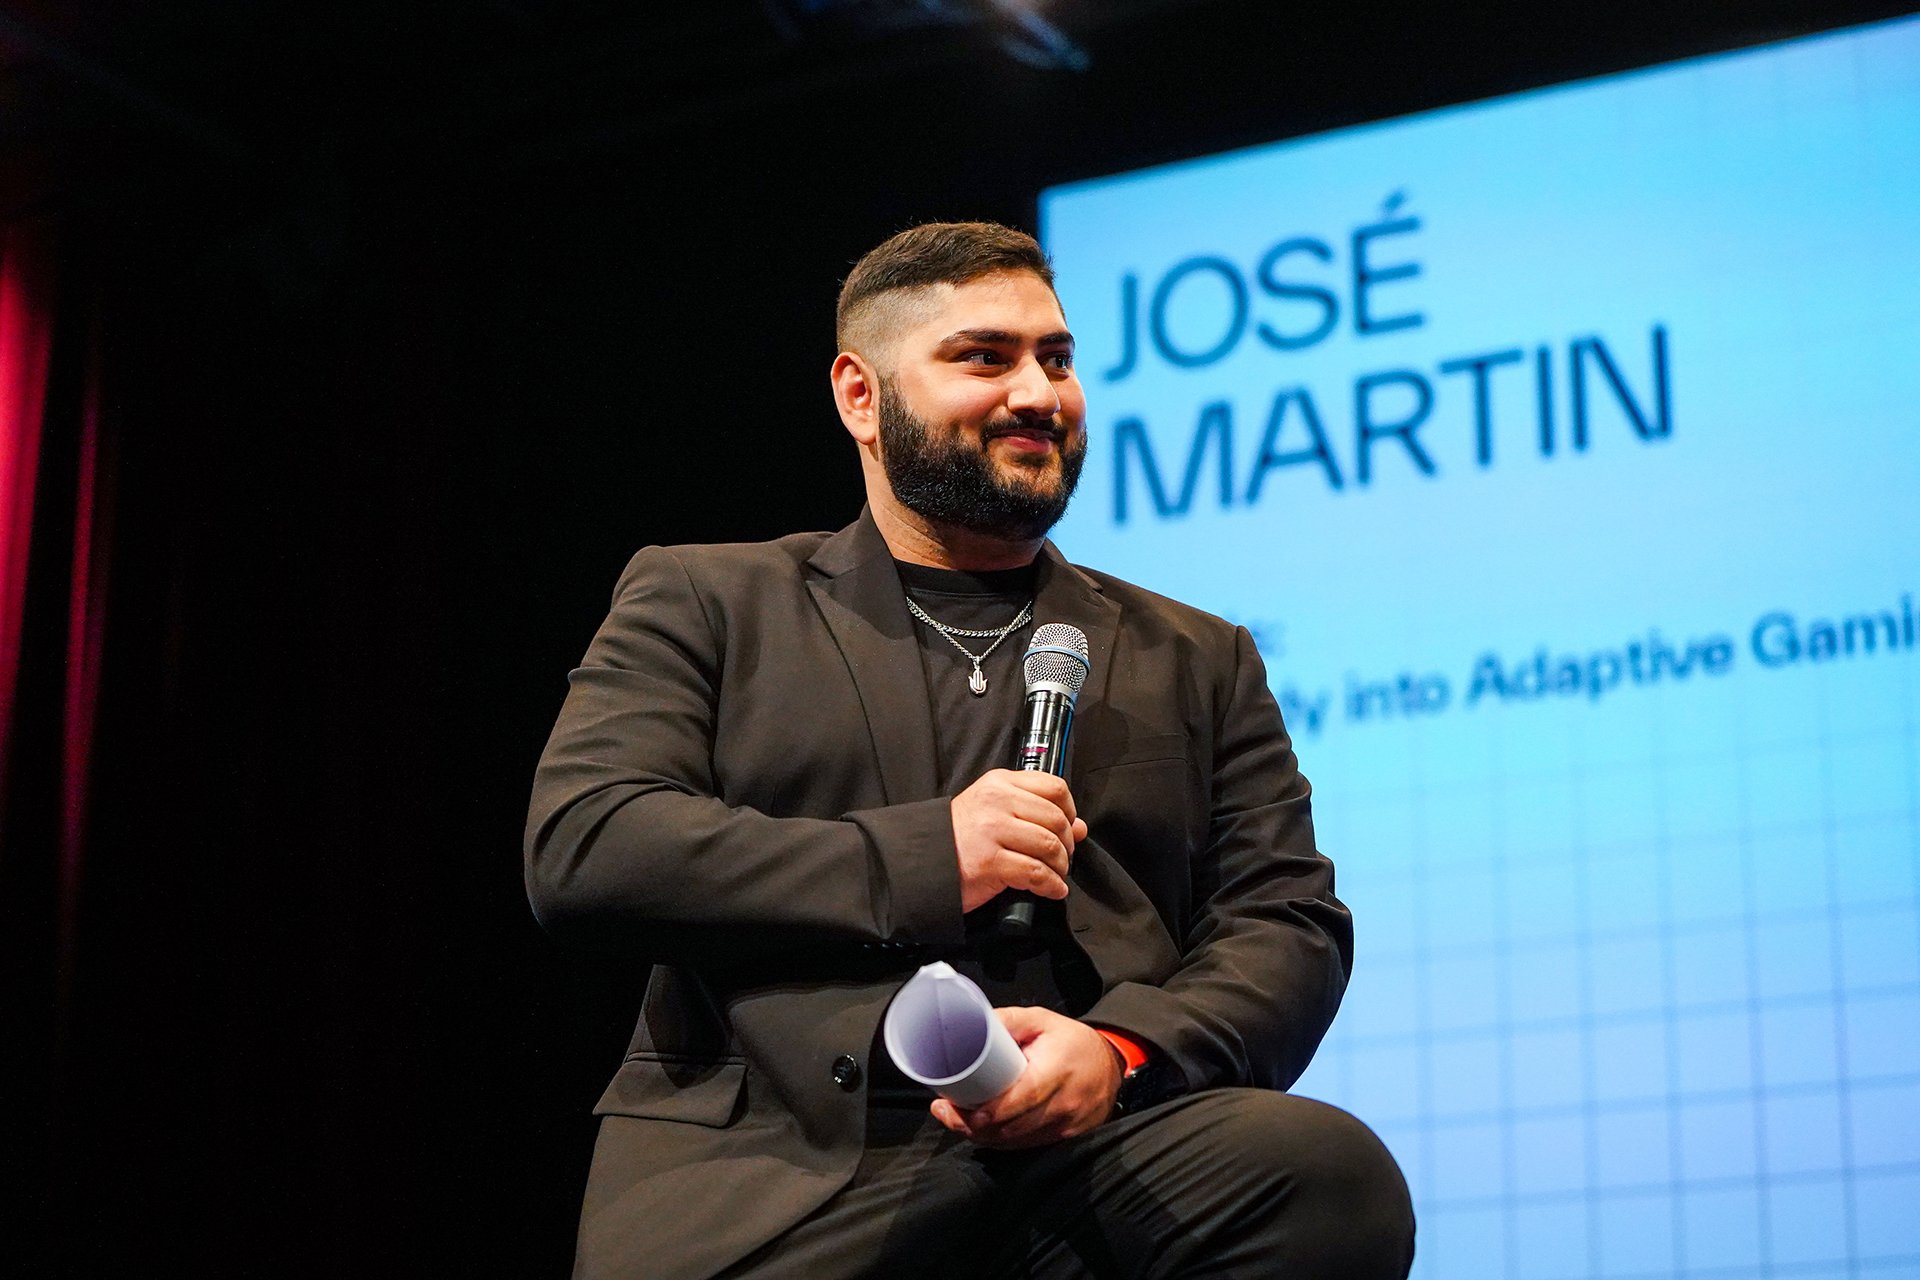  Speaker with microphone on the stage with name “JOSE MARTIN” projected behind him on the screen 